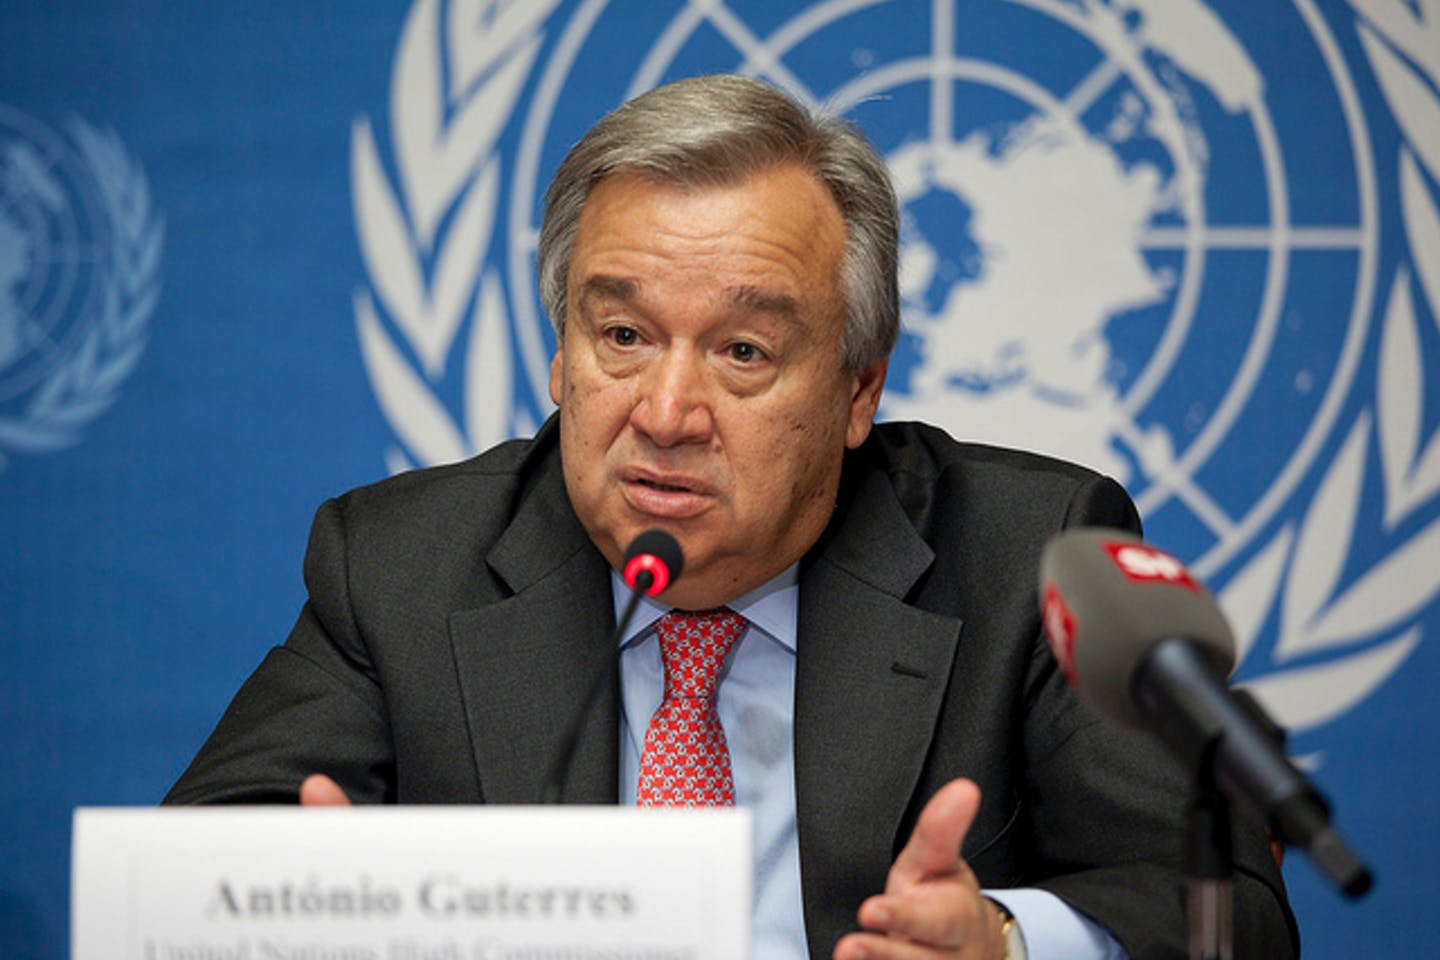 UN General-Secretary Stresses World is on the ‘Verge of the Abyss’ Regarding Climate Change